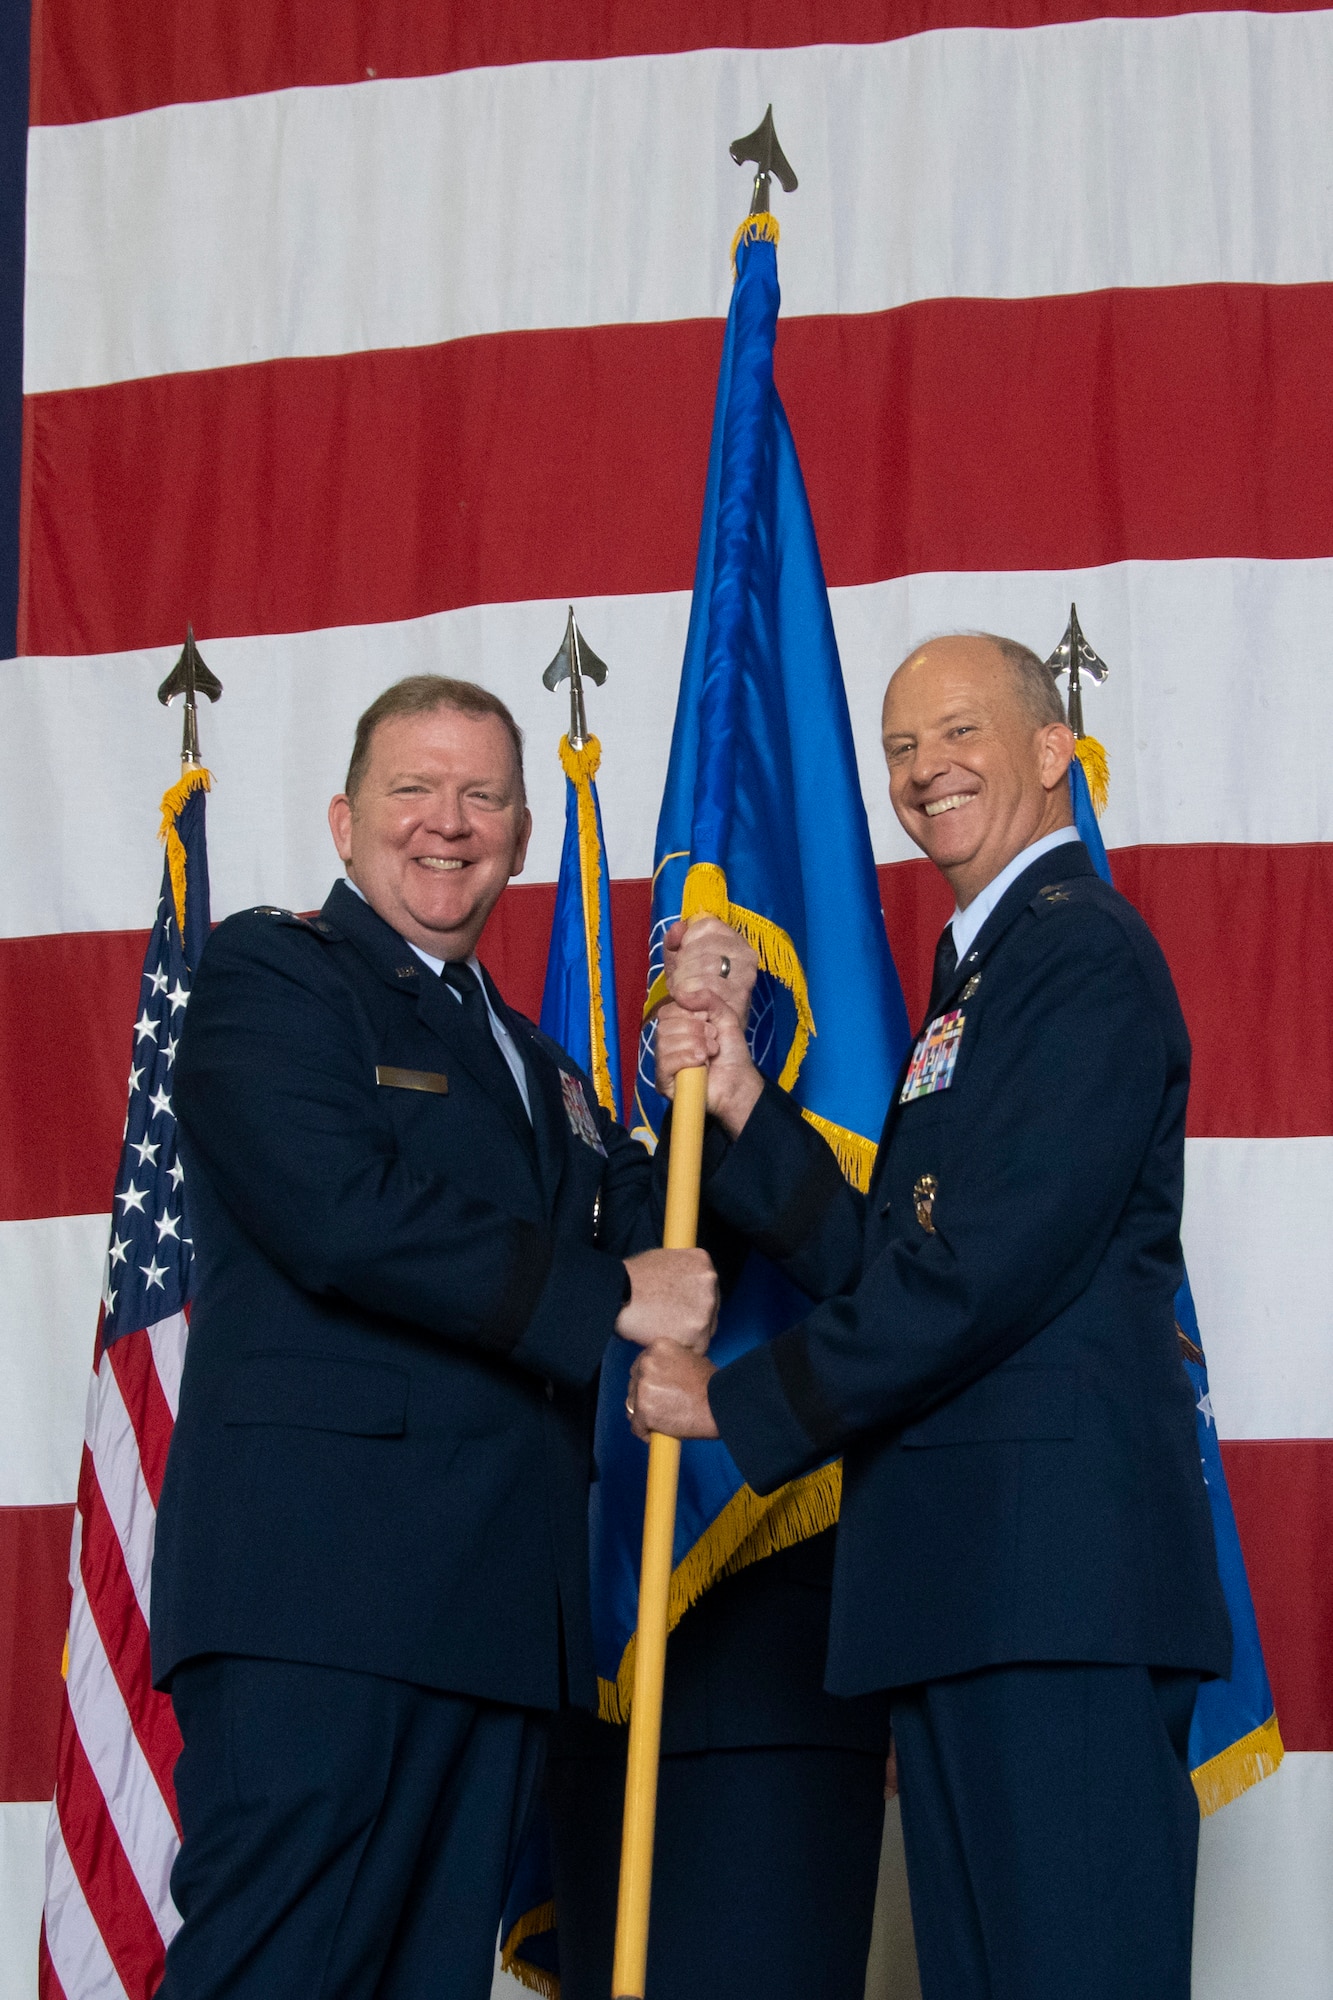 Maj. Gen. Bret C. Larson (right) took command of 22nd Air Force from Maj. Gen. John P. Healy during a ceremony at the Hangar 5, Dobbins Air Reserve Base, Georgia, July 10, 2021.
The ceremony was officiated by Lt. Gen. Richard W. Scobee (left), commander of Air Force Reserve Command and Chief of the Air Force Reserve.

(U.S. Air Force photo by Senior Airman Kendra A. Ransum)